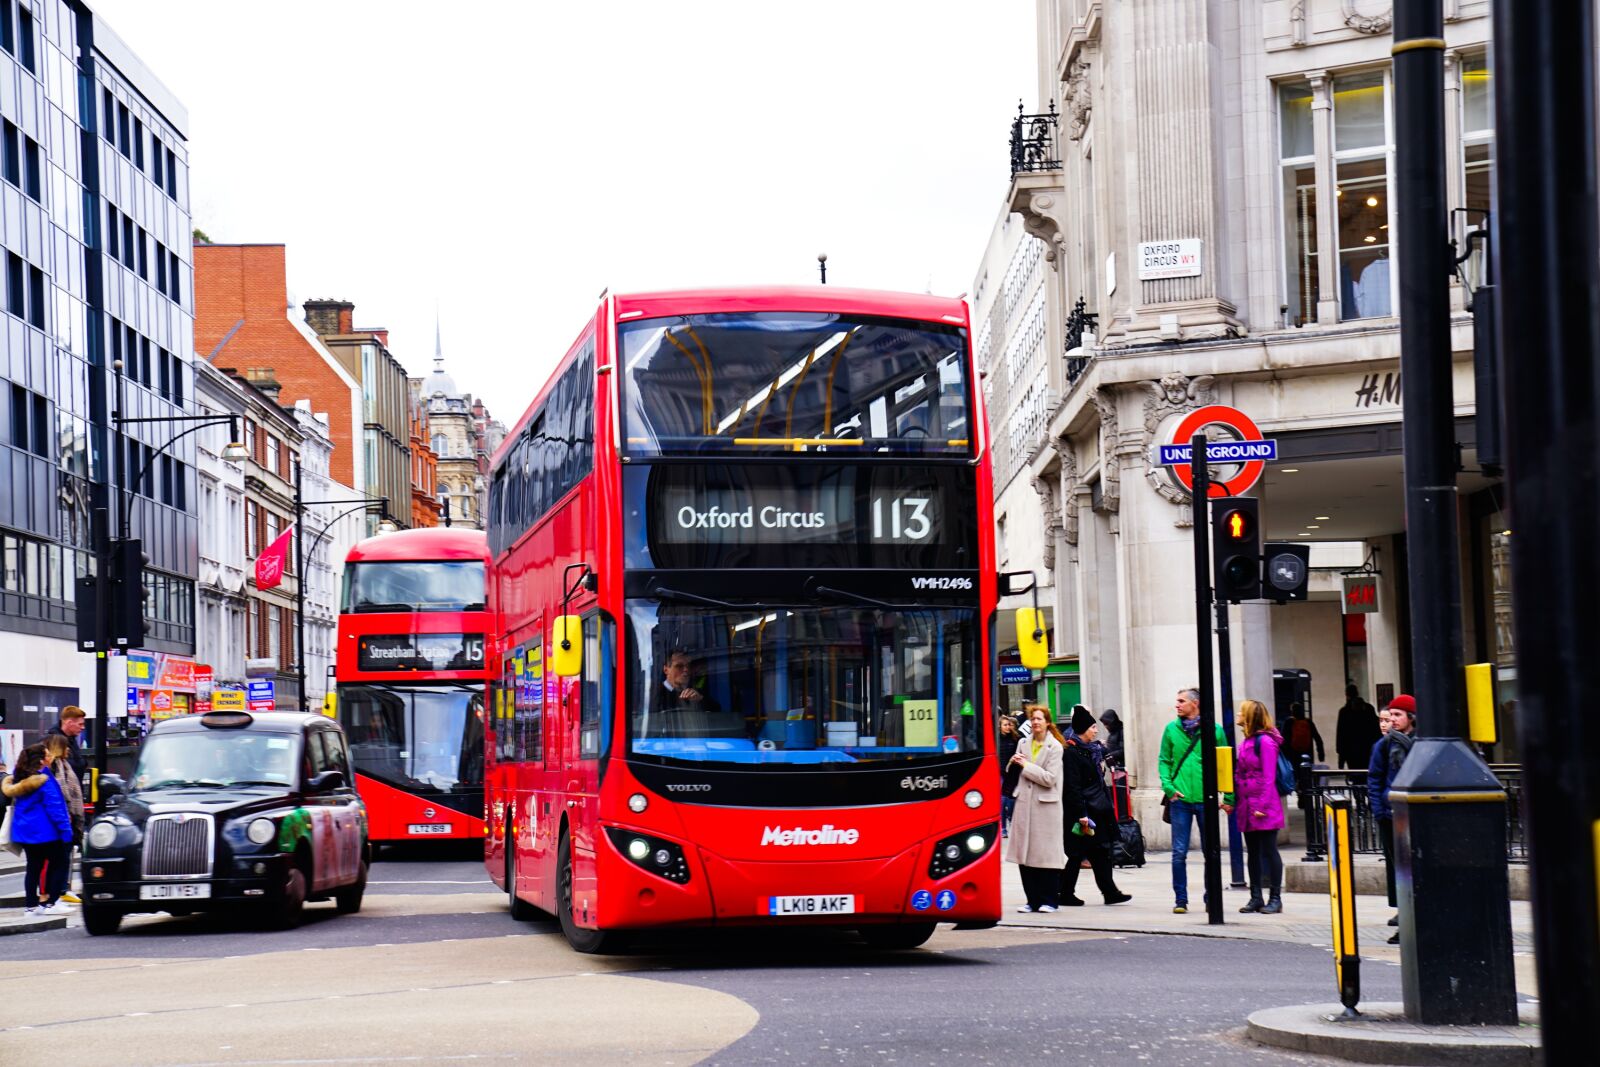 Sony a7 II sample photo. Oxford street, bus, double photography